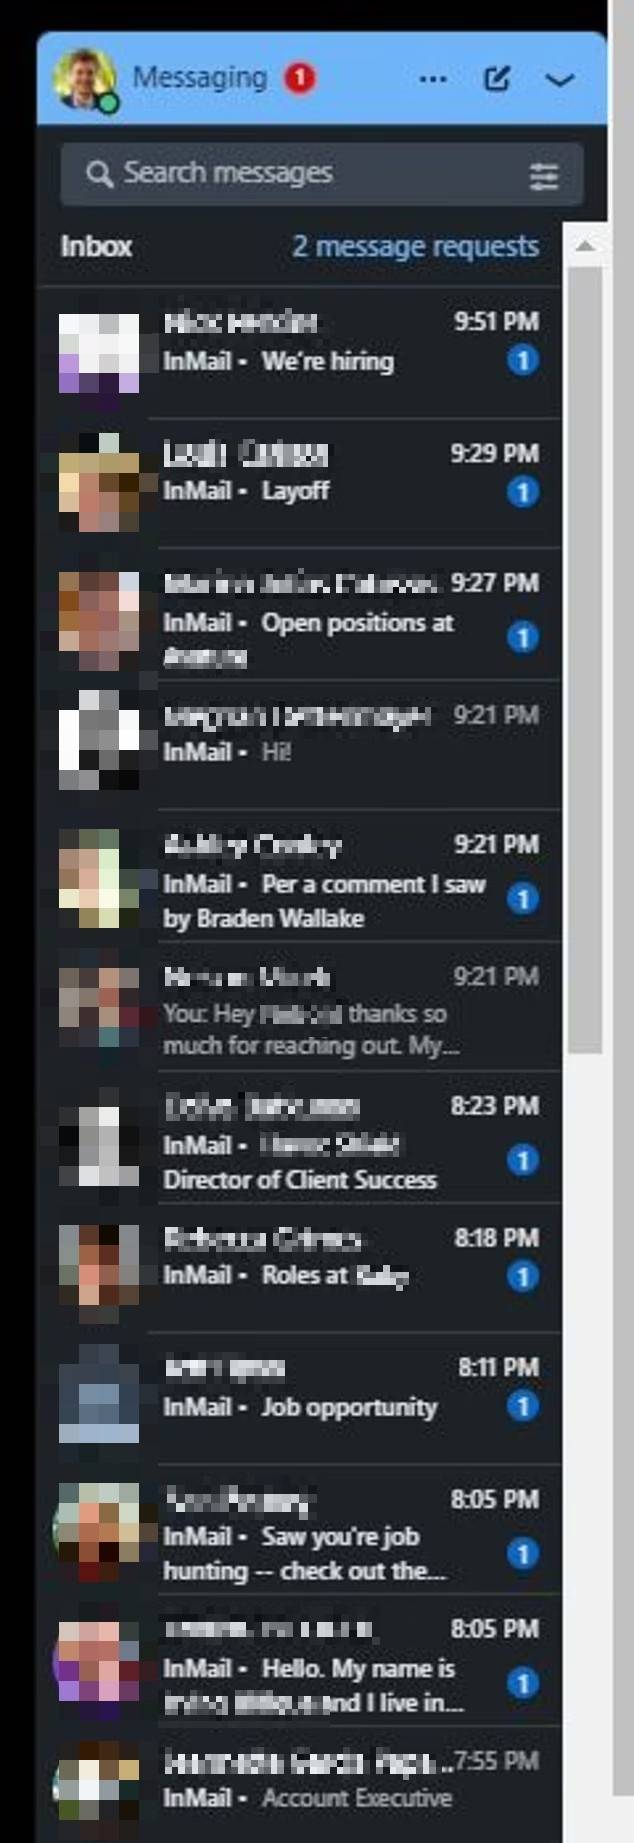 Former employee Noah Smith has been inundated with messages on LinkedIn. Credit: Noah Smith/LinkedIn